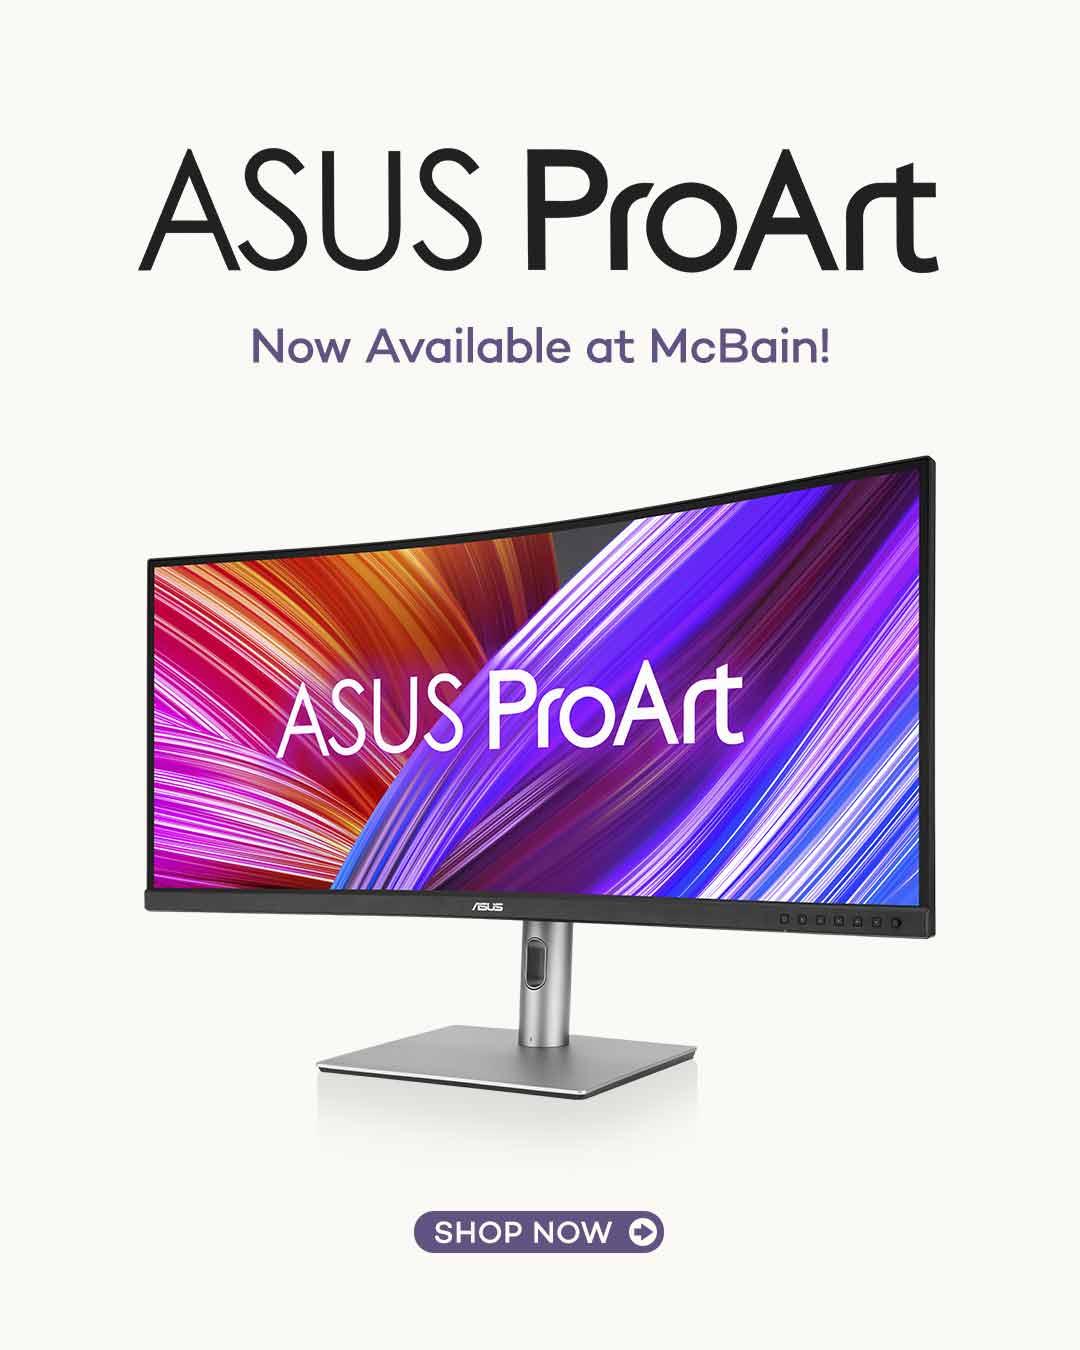 Asus ProArt Displays Now Available at McBain